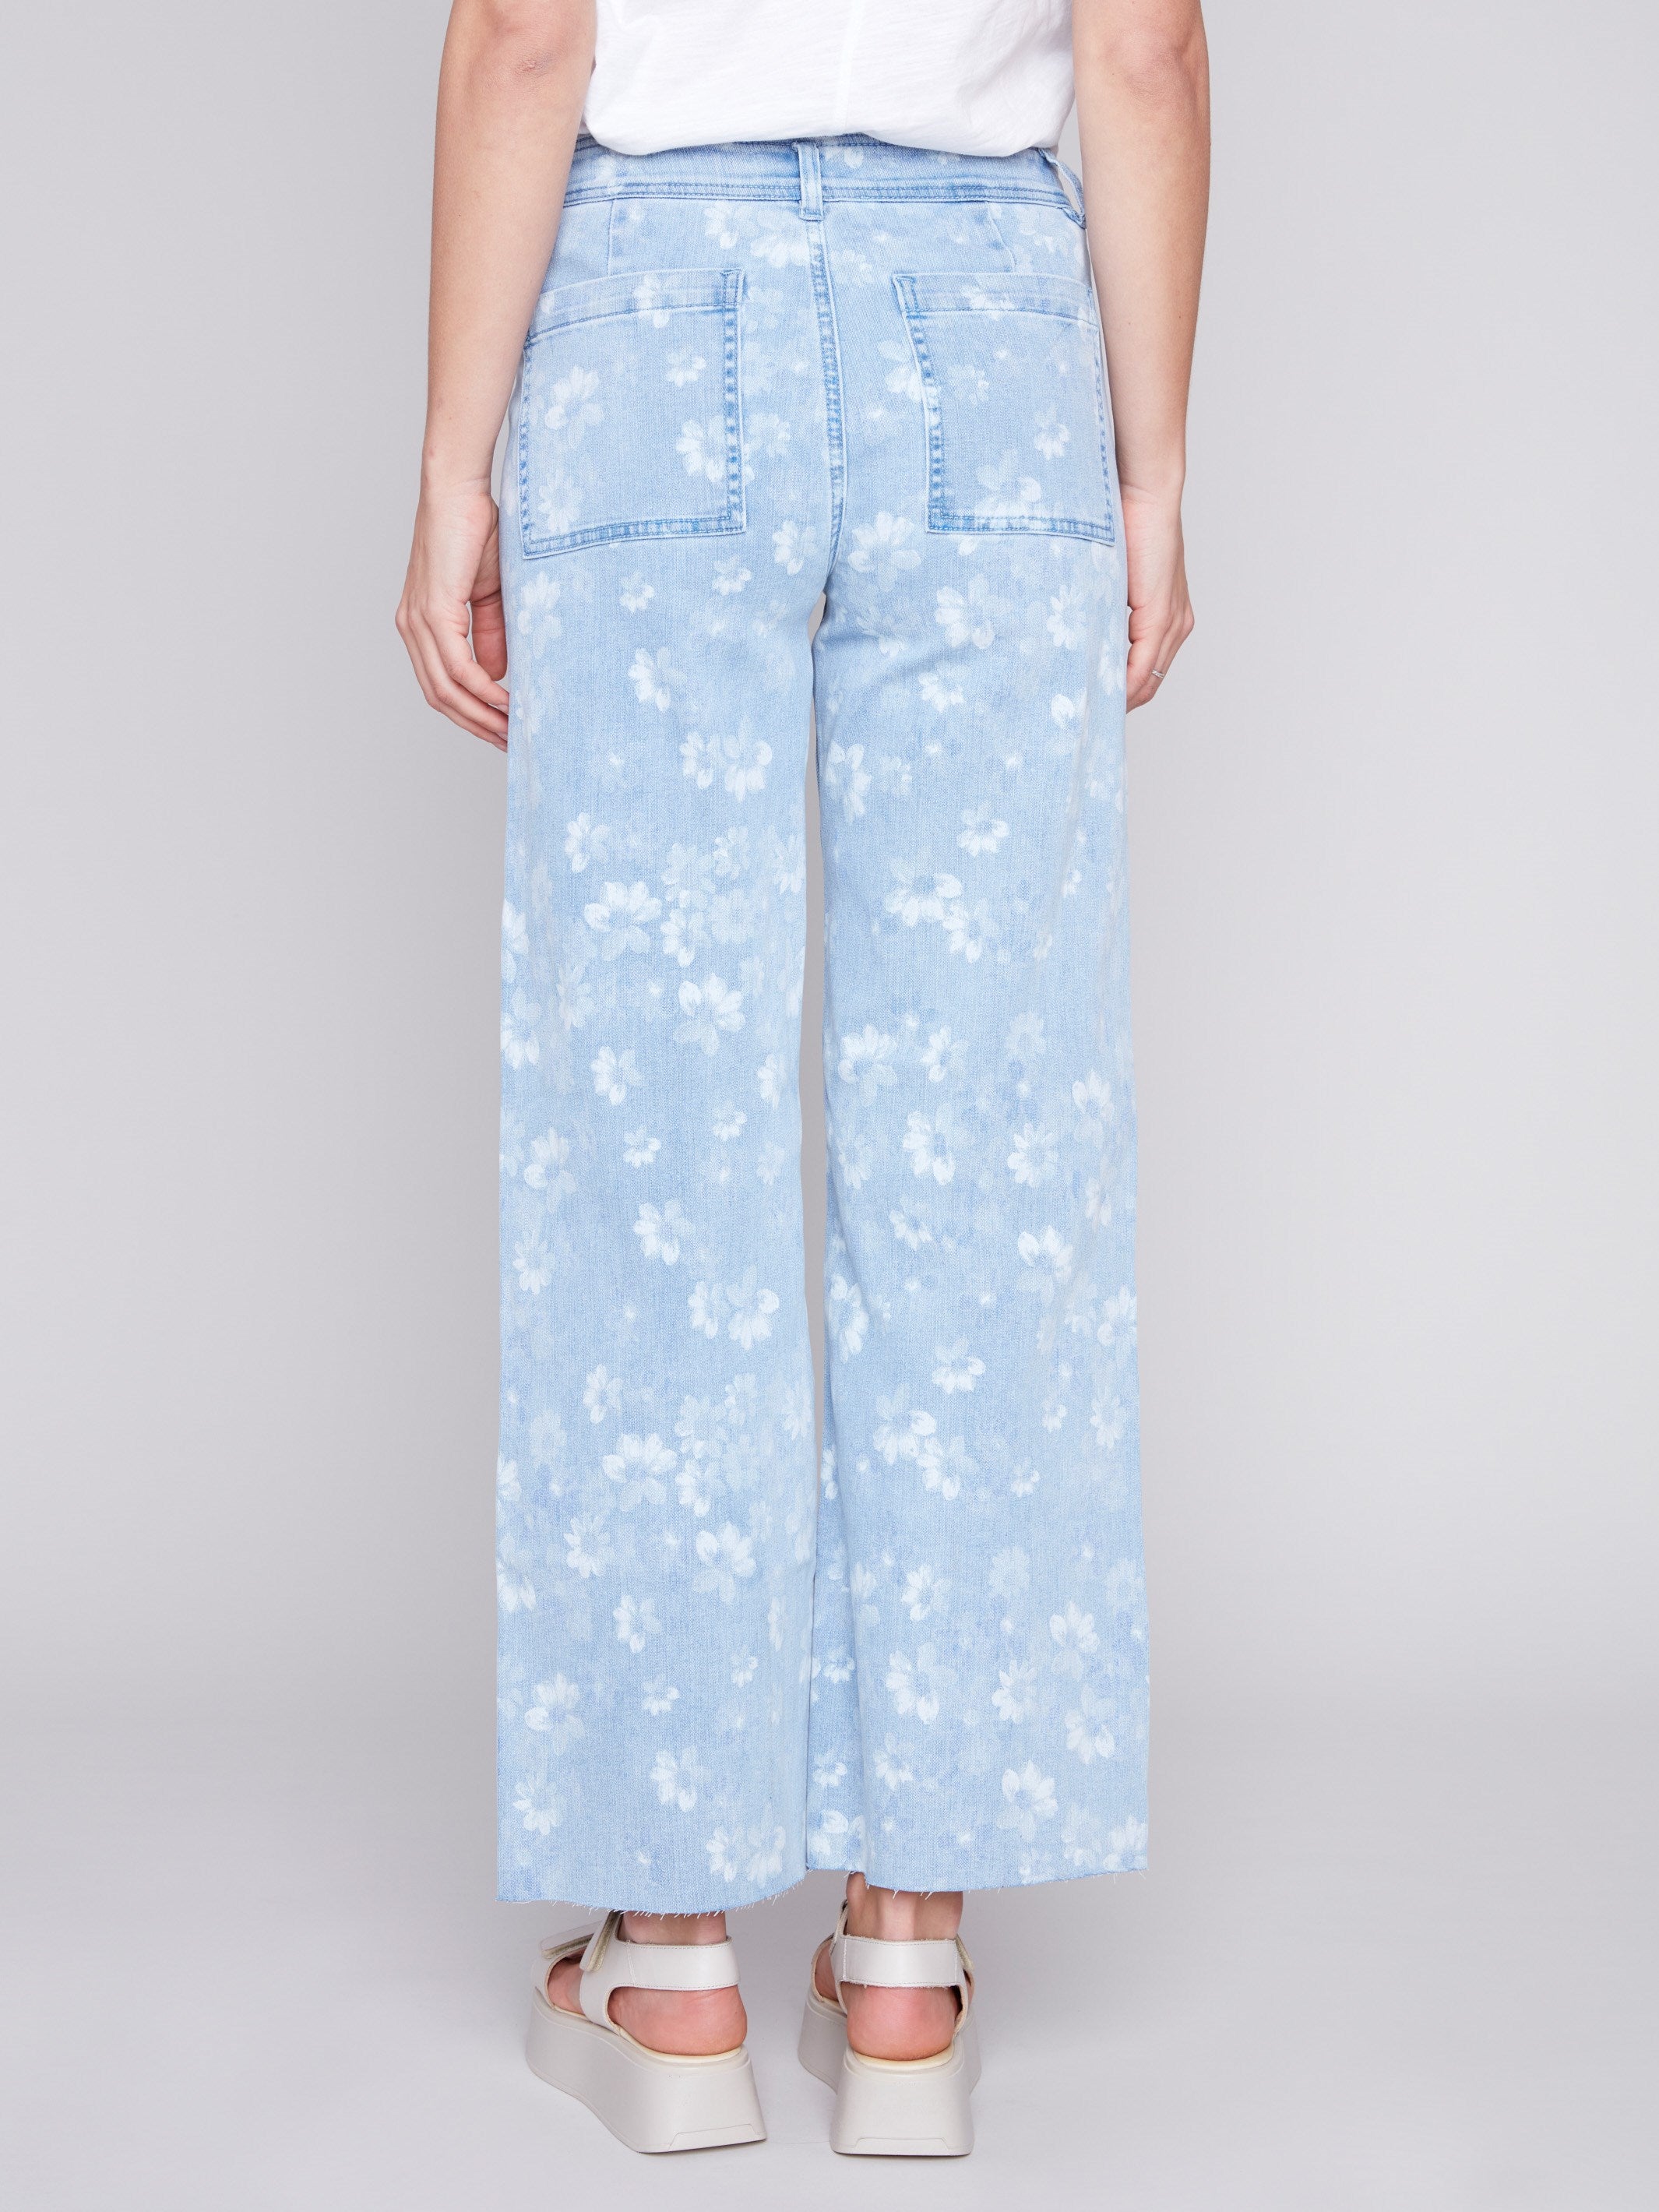 Printed Wide Leg Pants with Raw Hem - Daisy Blue - Charlie B Collection Canada - Image 3